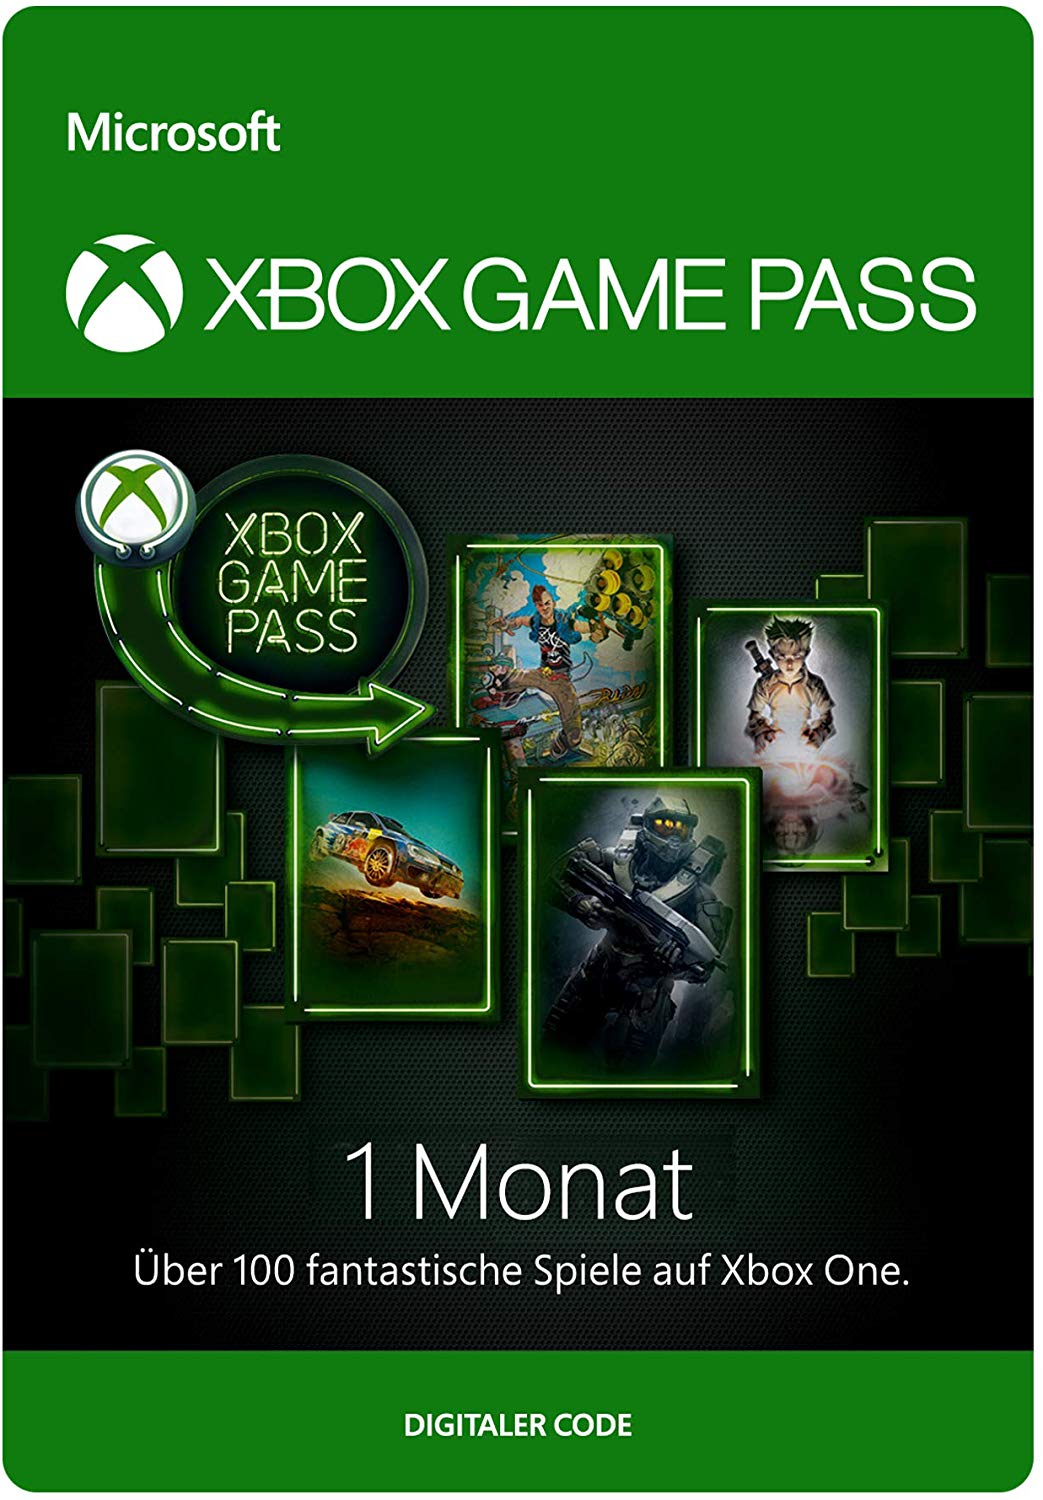 can you play xbox one games on pc using the xbox game pass